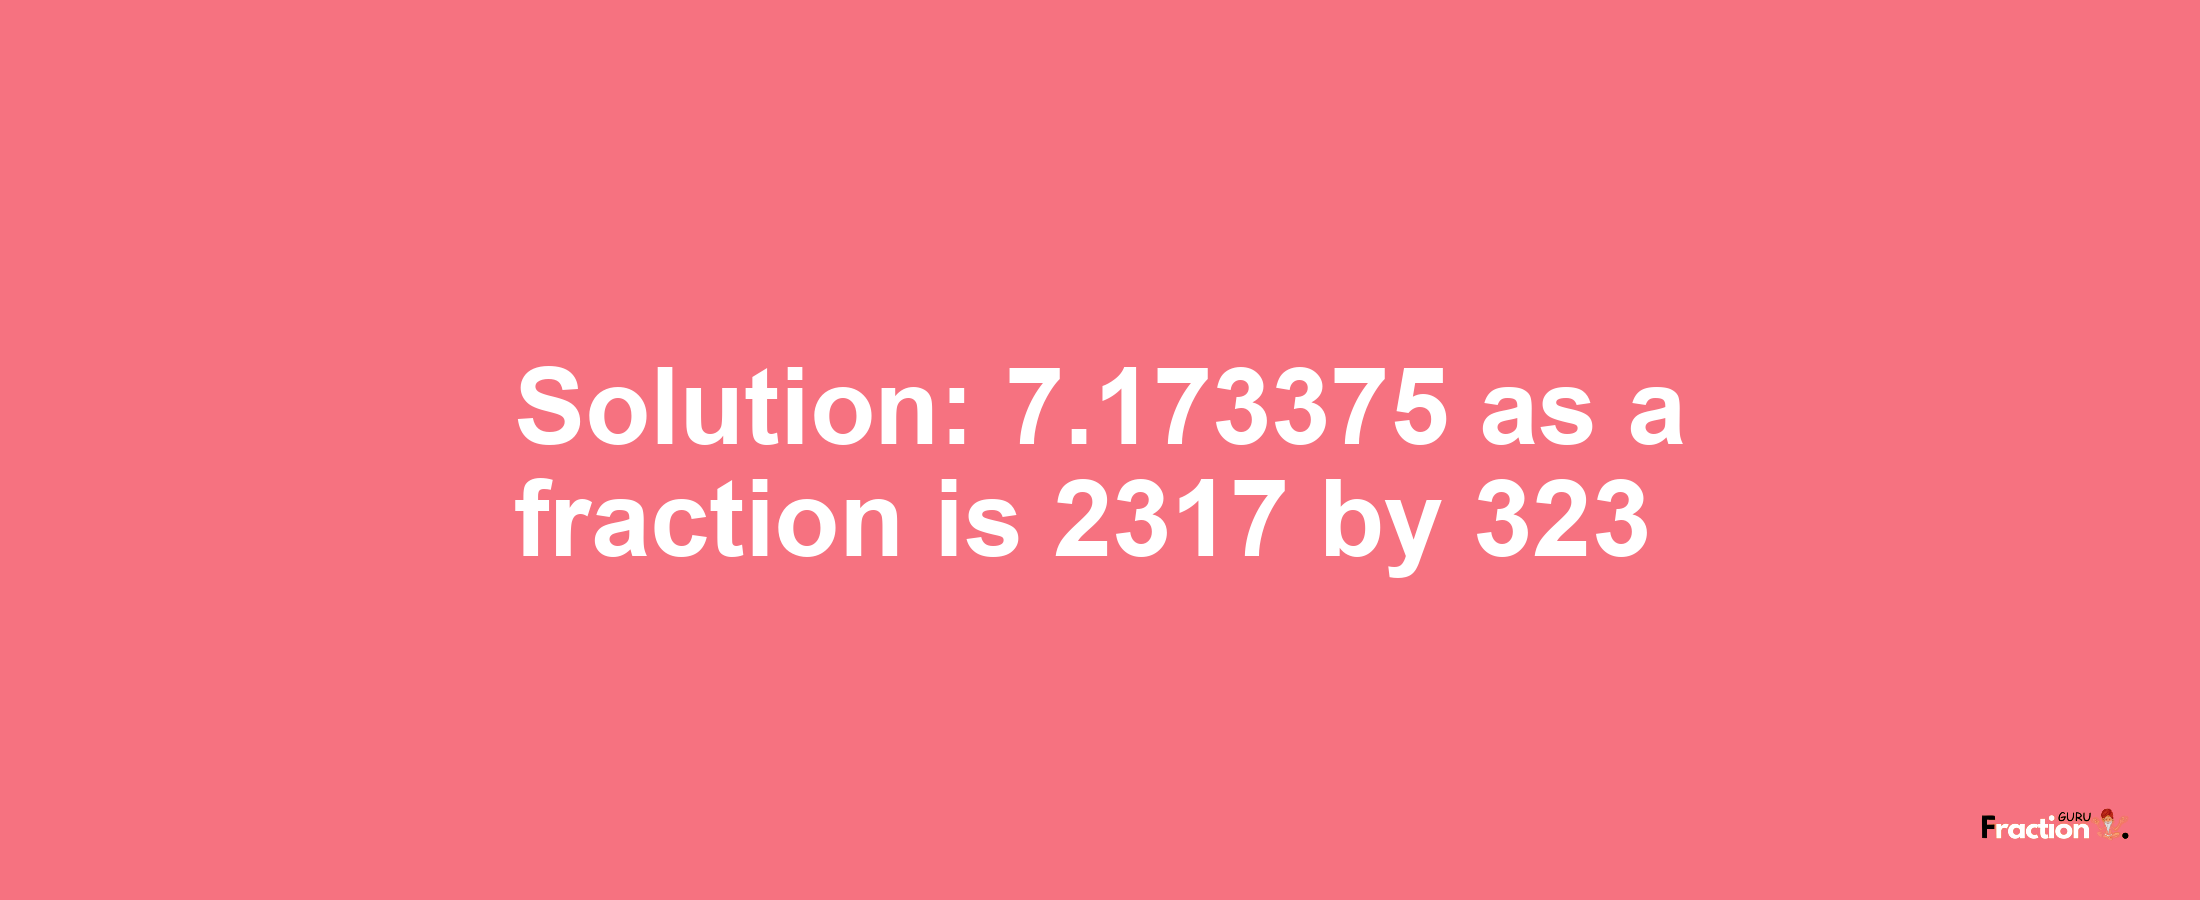 Solution:7.173375 as a fraction is 2317/323